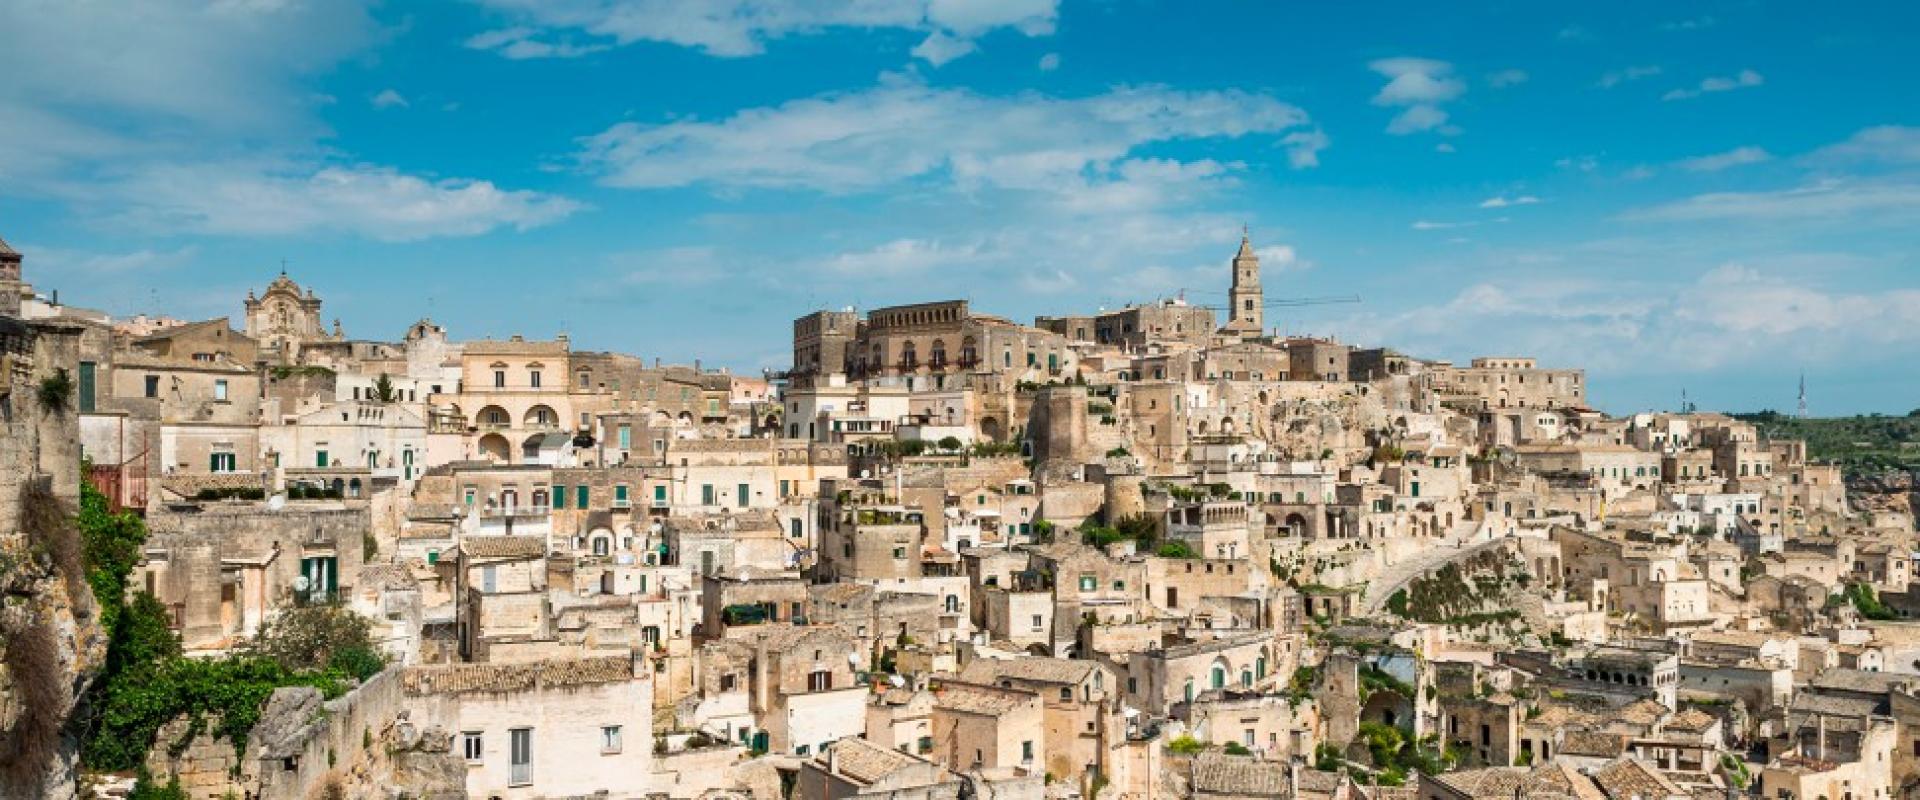 Visit of Bernalda and the Ammicc Palace in Matera area